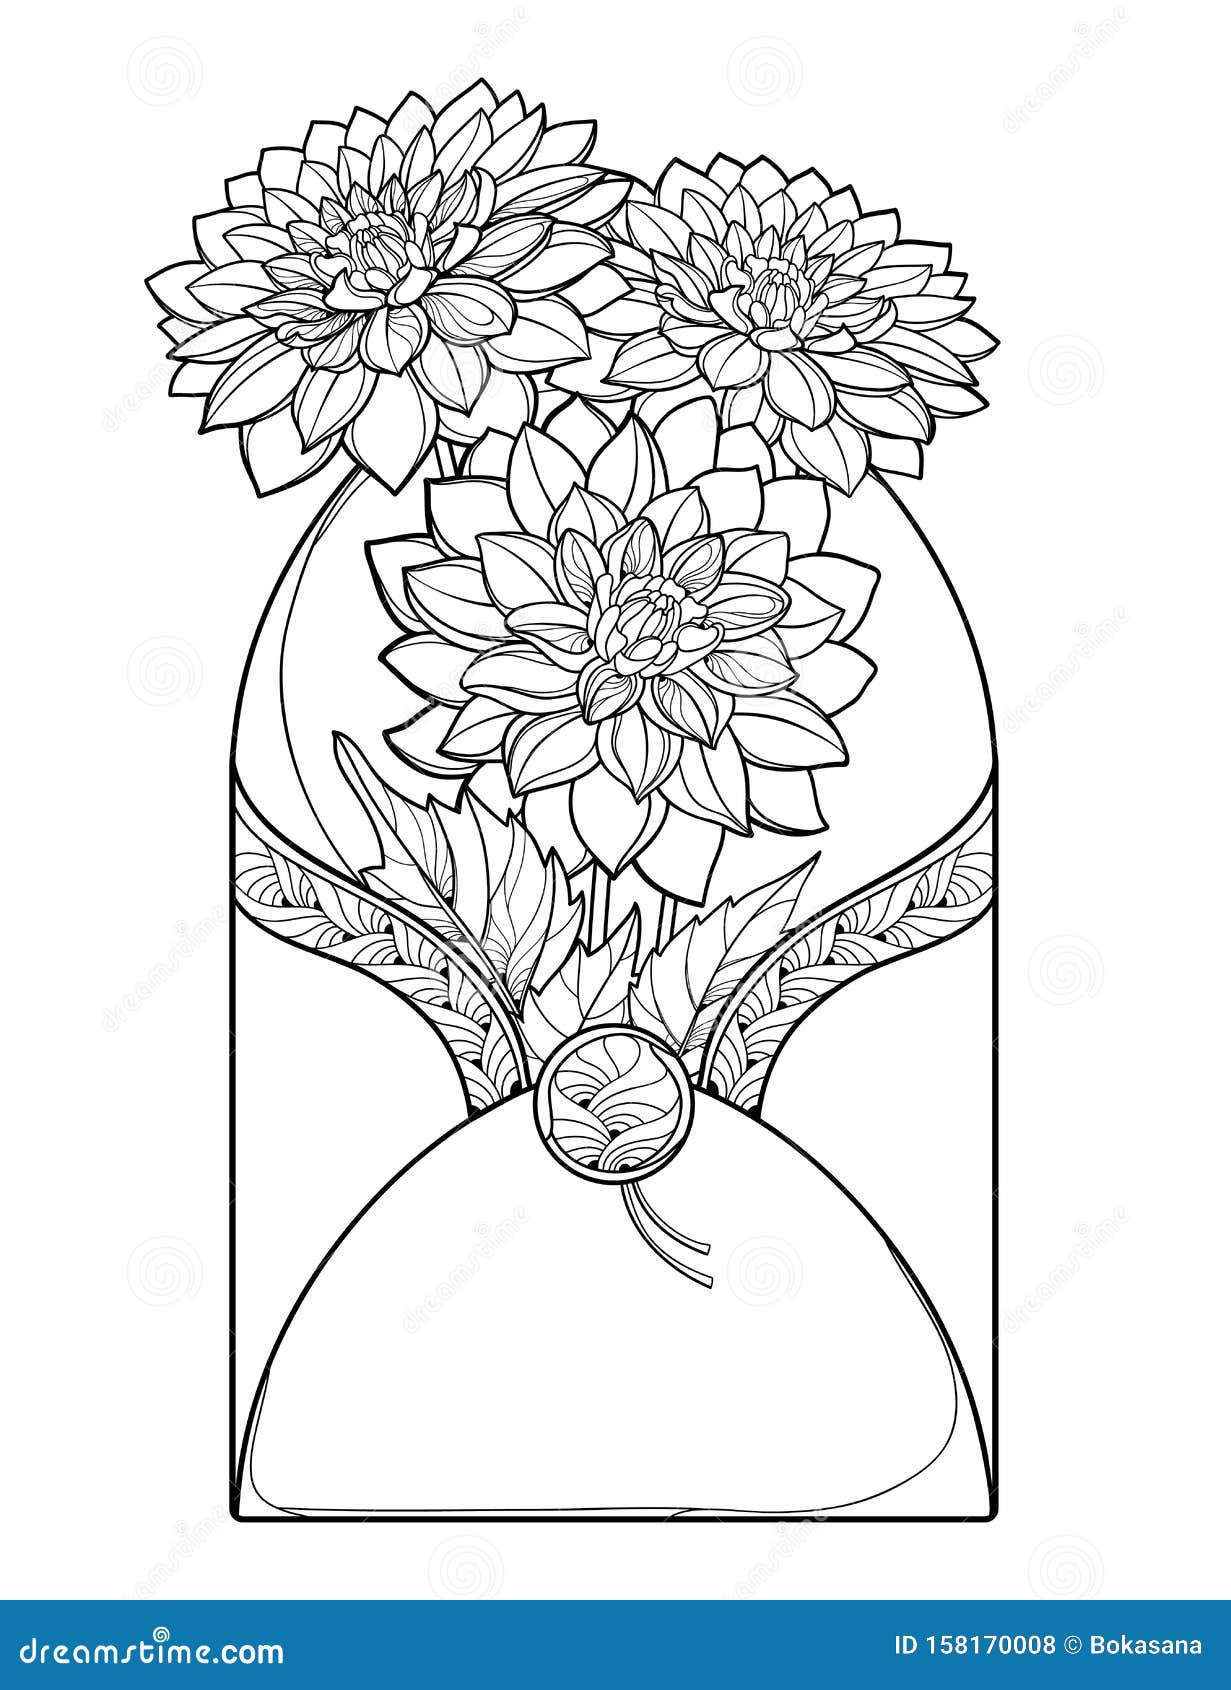  bouquet of outline dahlia or dalia flower and ornate leaf in open craft envelope in black  on white background.